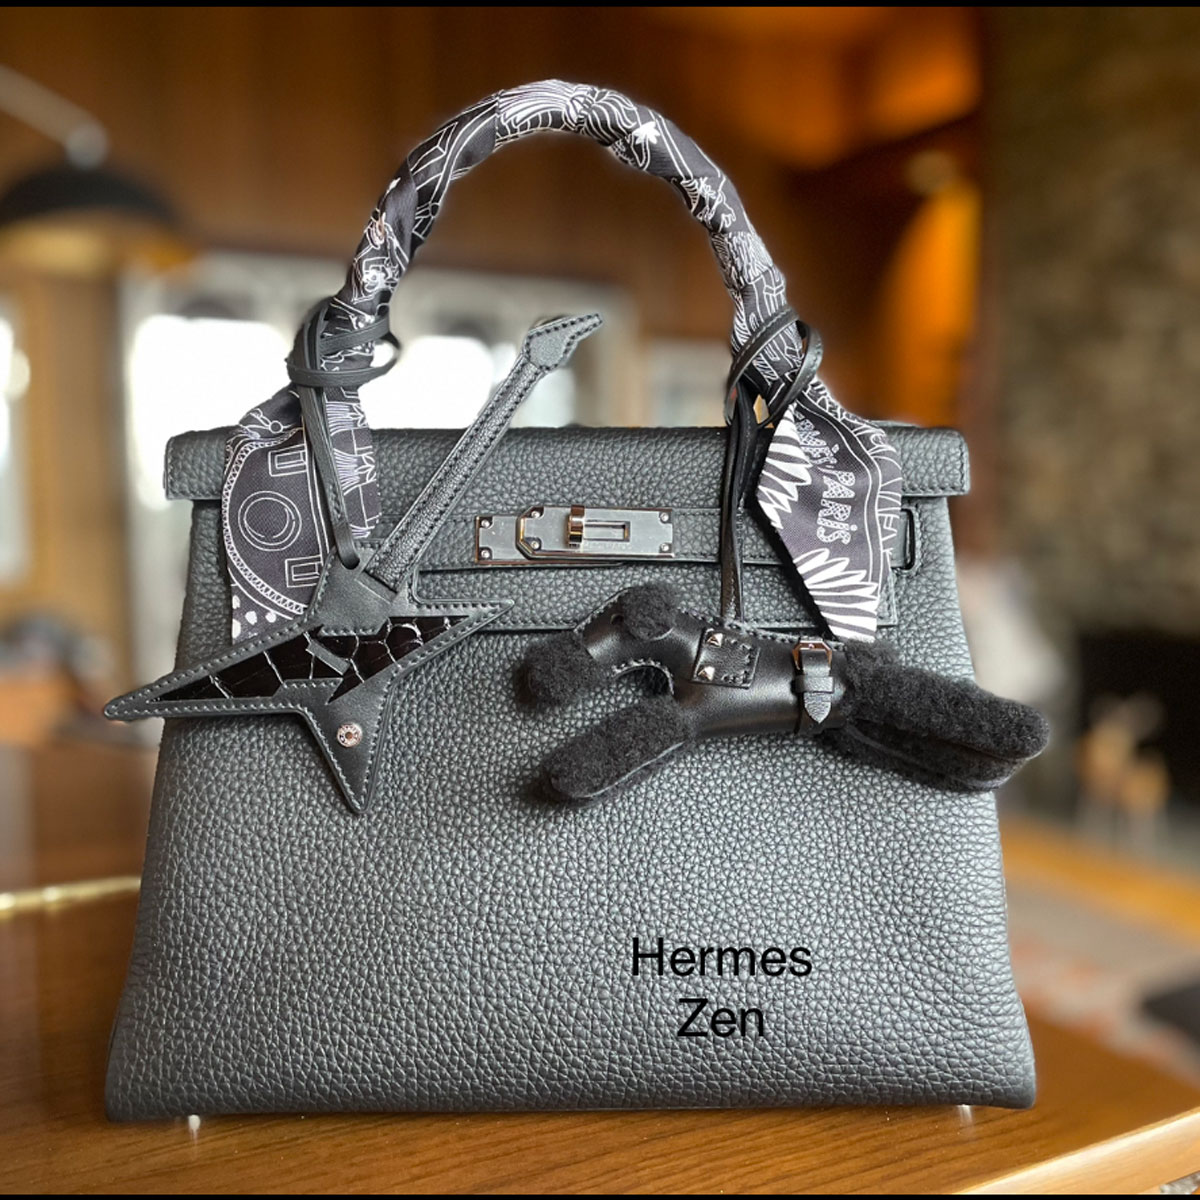 5 Pieces of Hermès Jewelry We Are Eyeing and Buying - PurseBlog